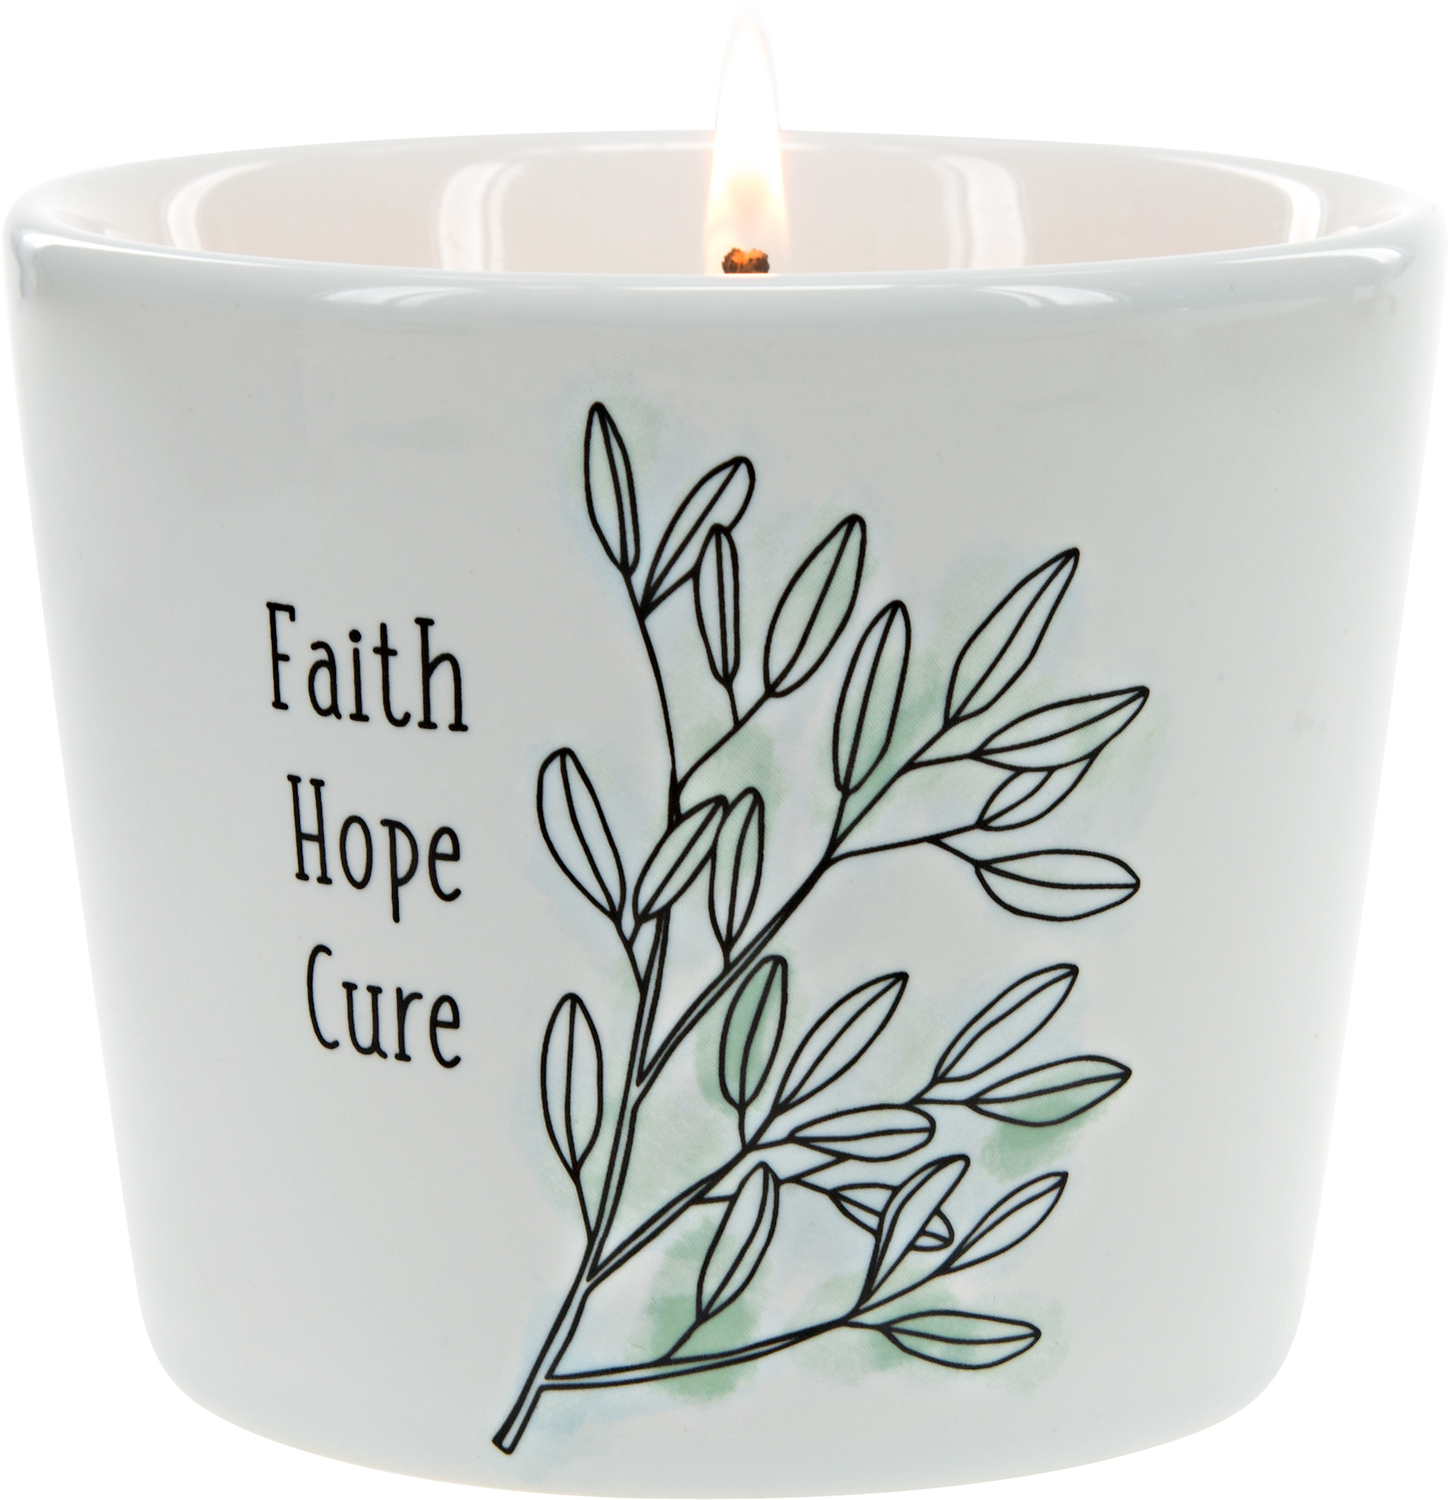 Faith Hope Cure by Faith Hope and Healing - Faith Hope Cure - 8 oz - 100% Soy Wax Candle Scent: Tranquility